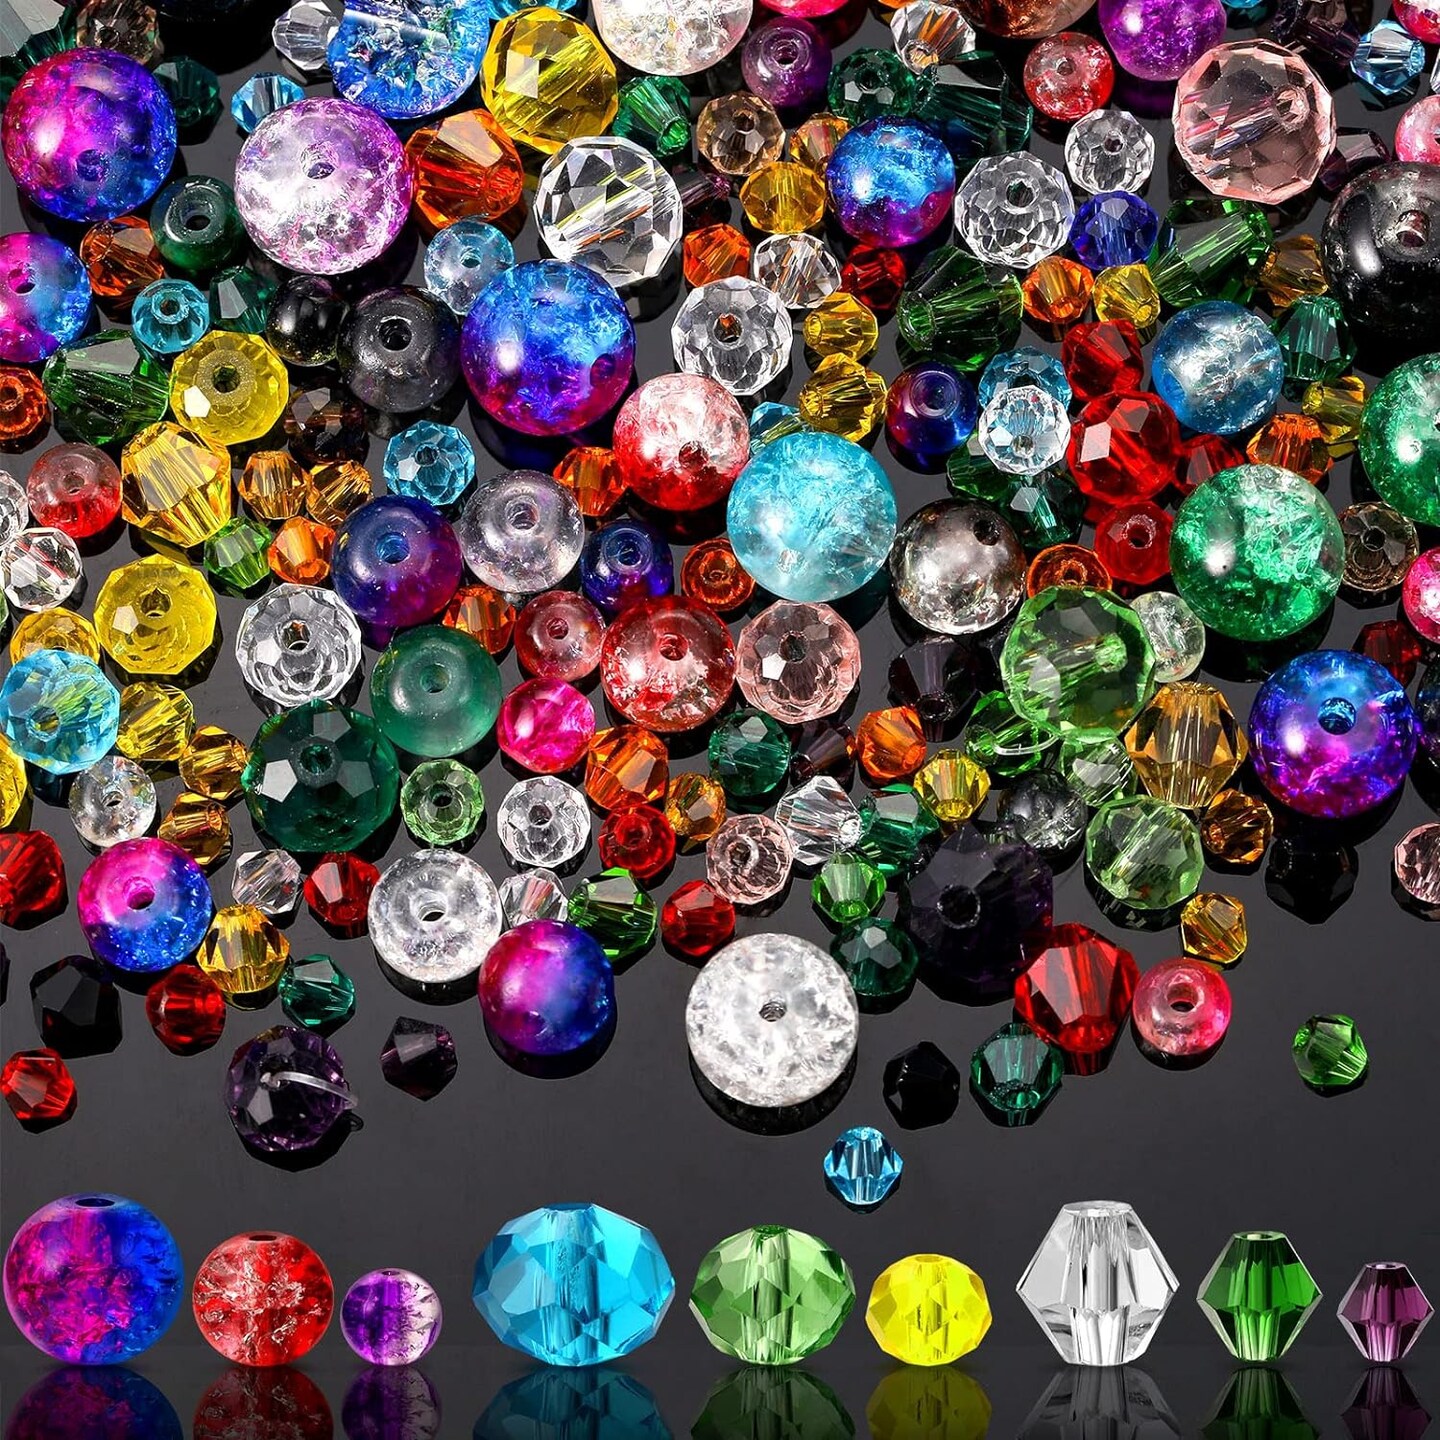 1300 Pieces Crystal Beads For Jewelry Making Crackle Glass Beads Faceted Crystal Glass Beads Bicone Crystal Beads Loose Beads Sparkly Beads For Bracelets Necklace Pendants Making Supplies